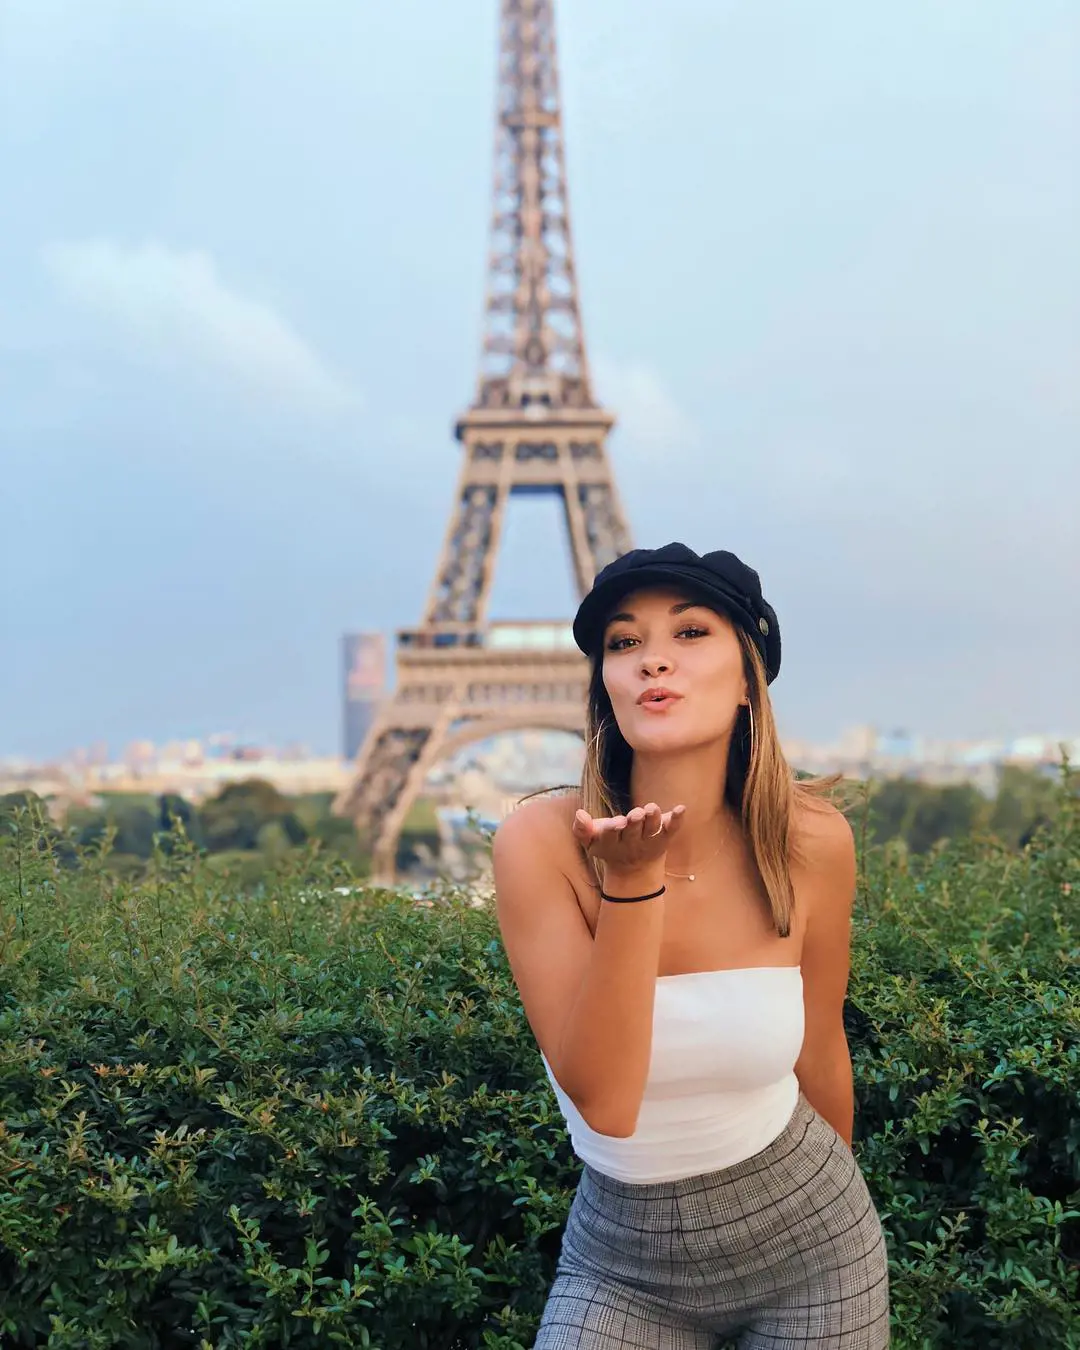 Emily during her trip to Paris, France in September 2018